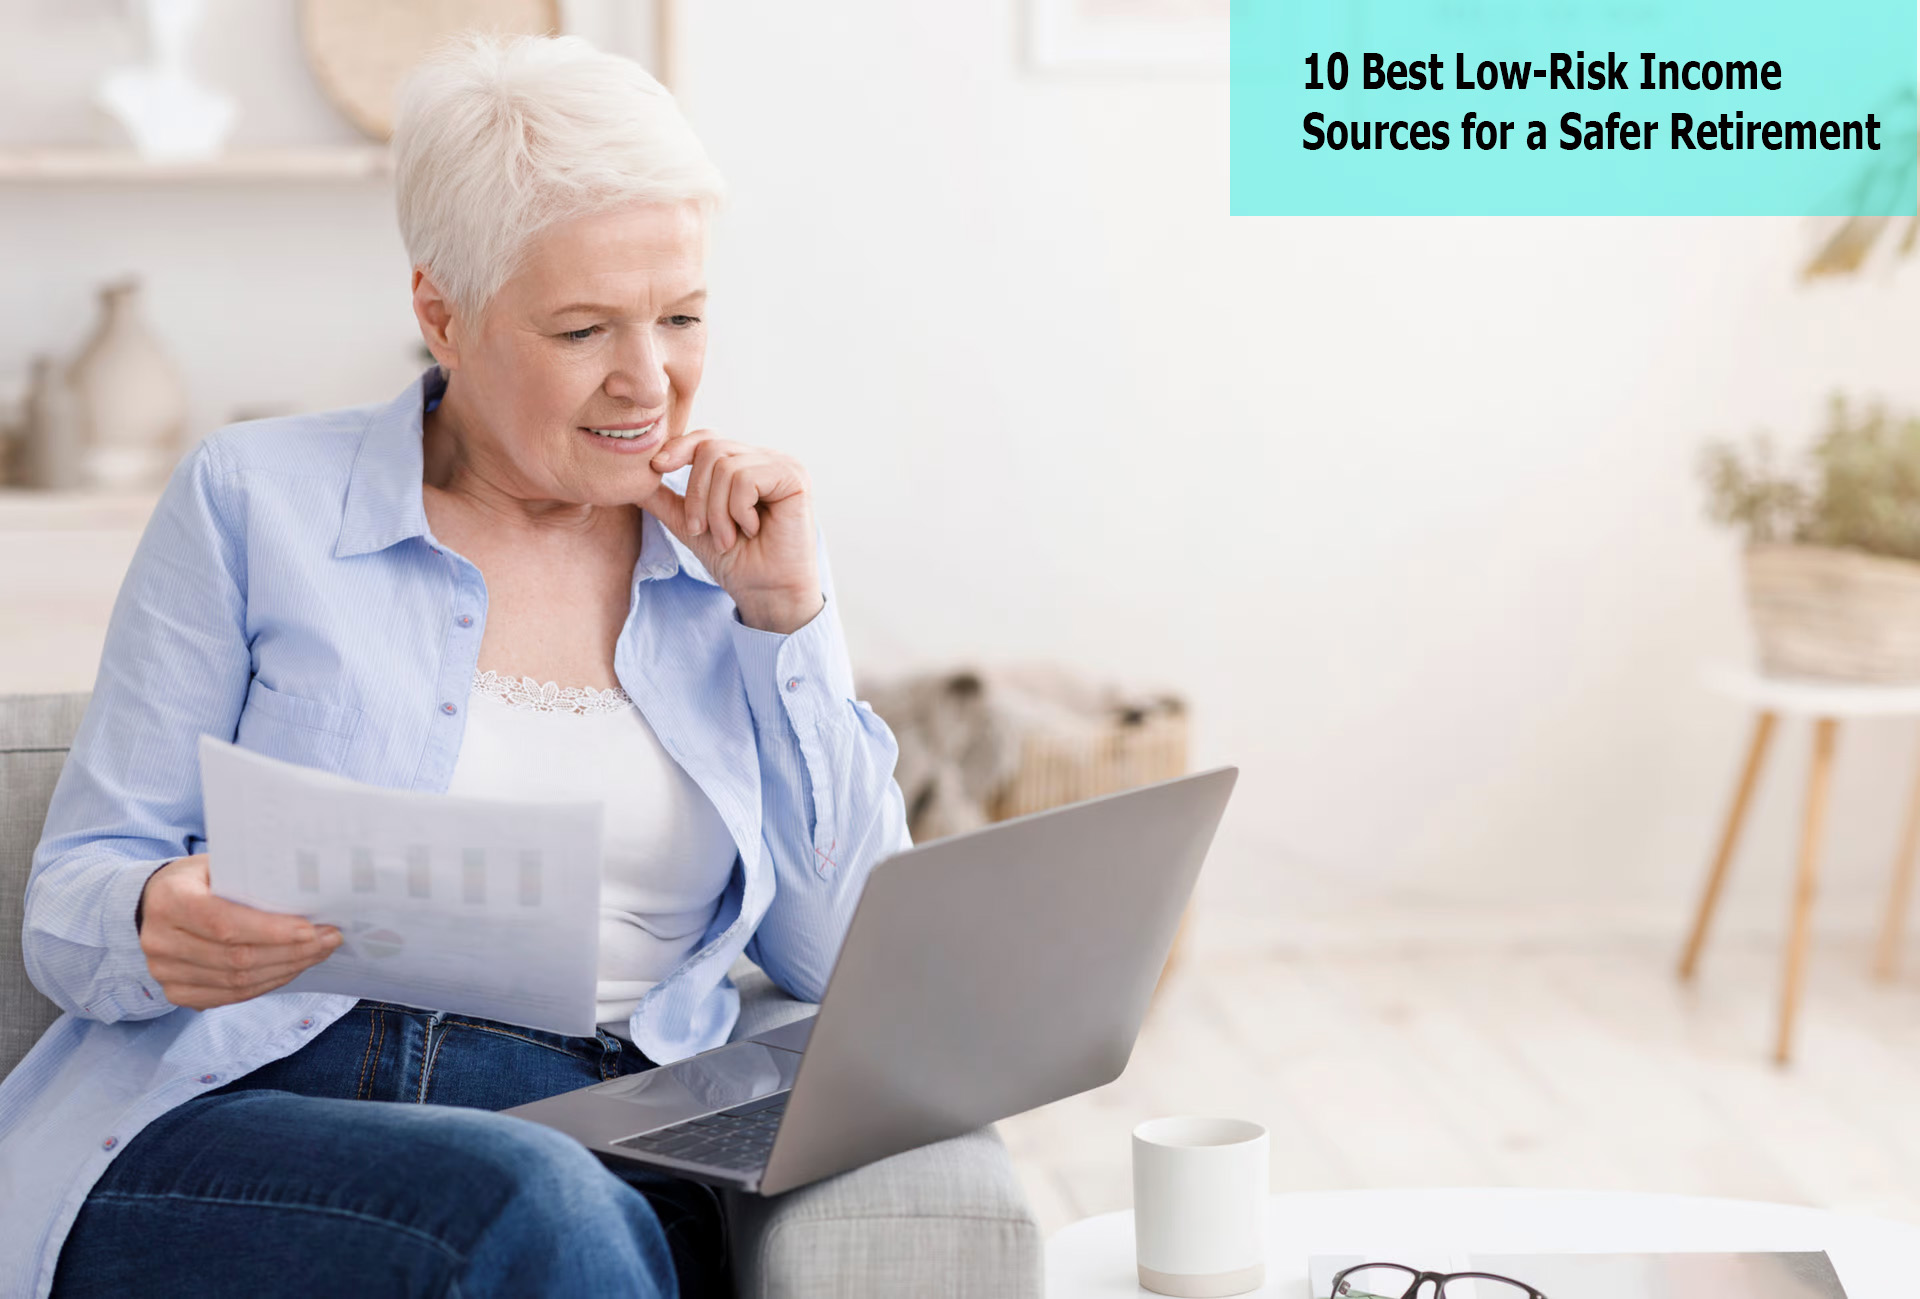 10 Best Low-Risk Income Sources for a Safer Retirement